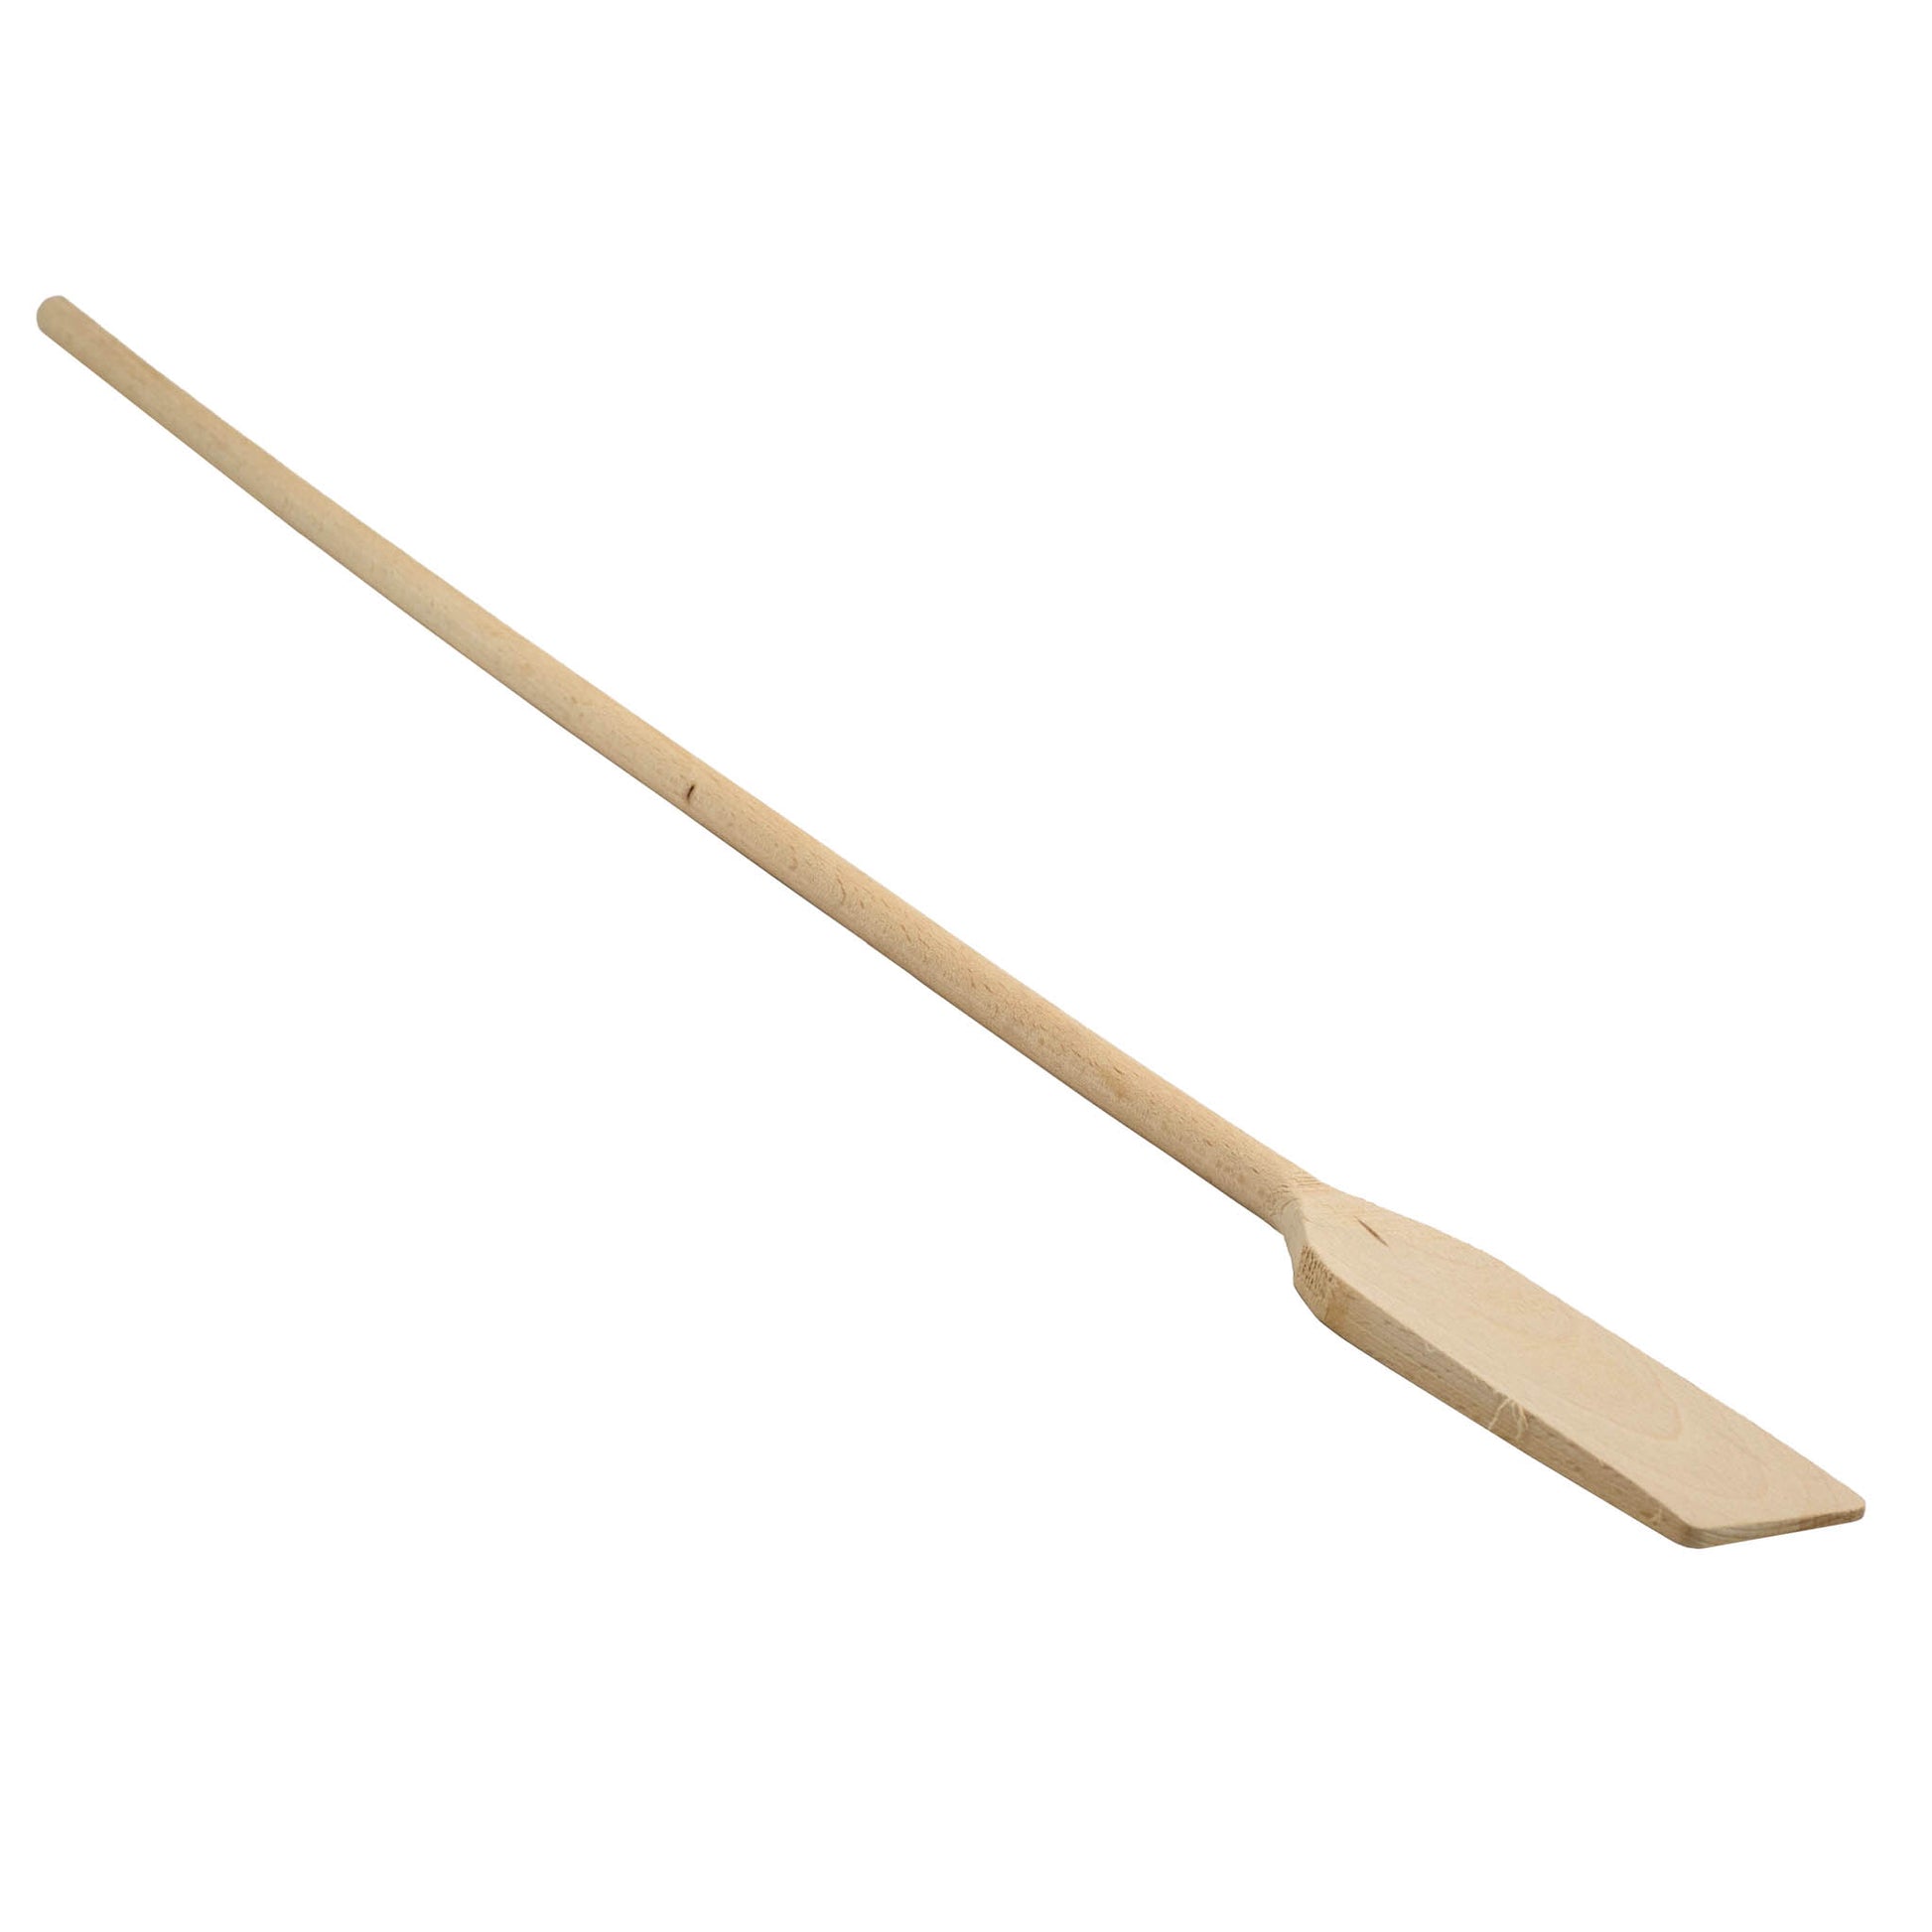 wooden paddle with 80cm handle used in passata making to stir tomatoes. 